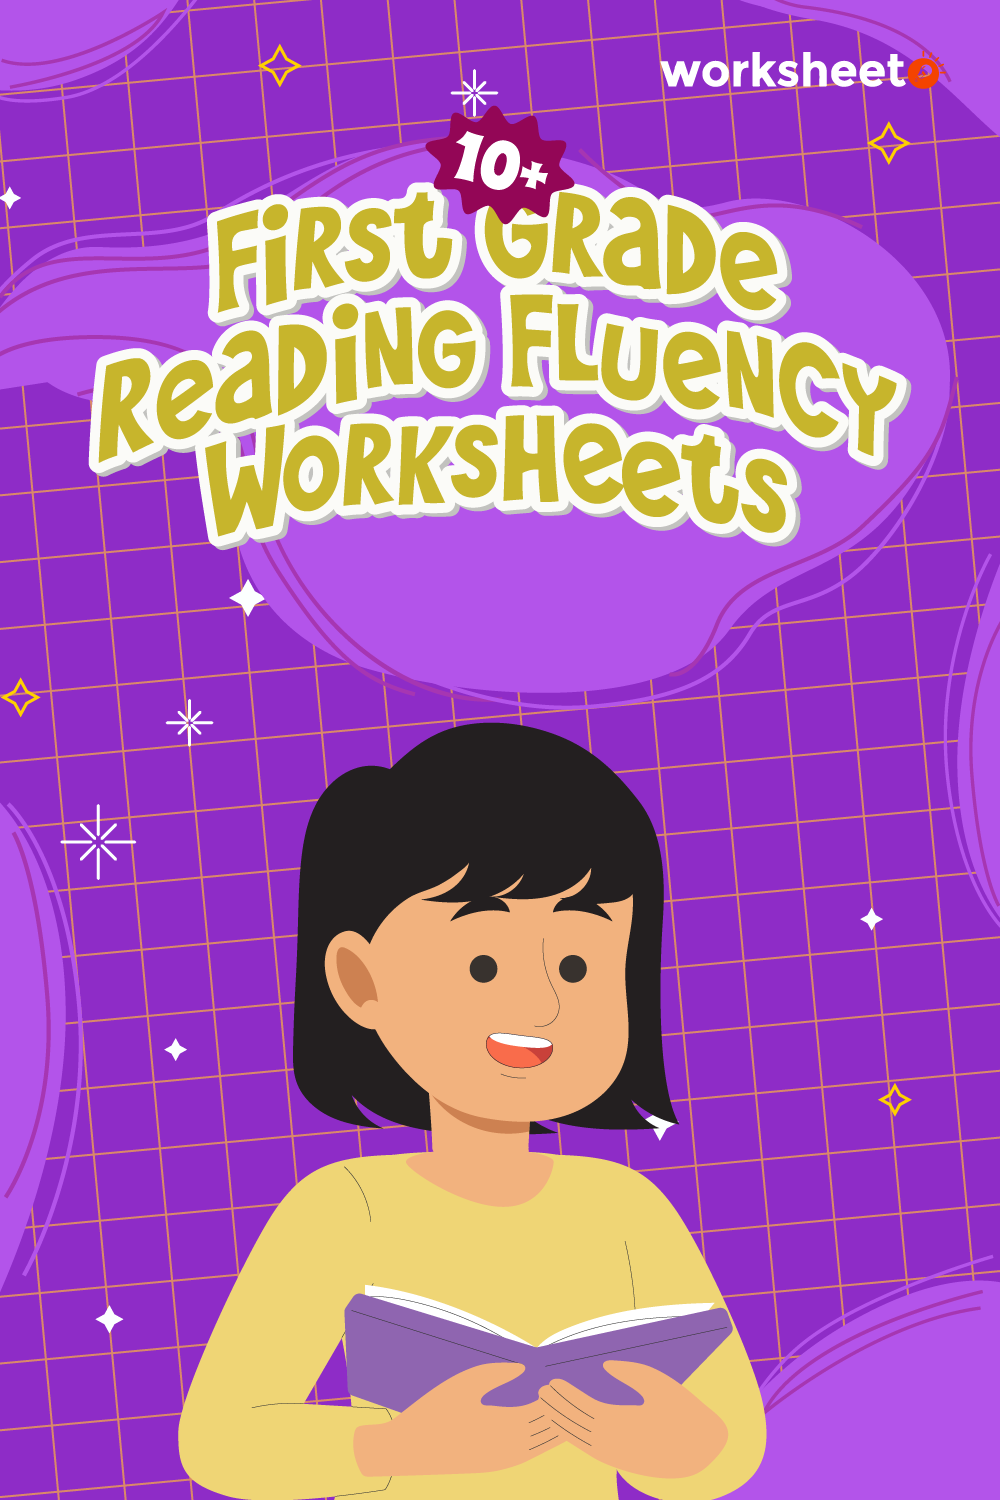 18 Images of First Grade Reading Fluency Worksheets